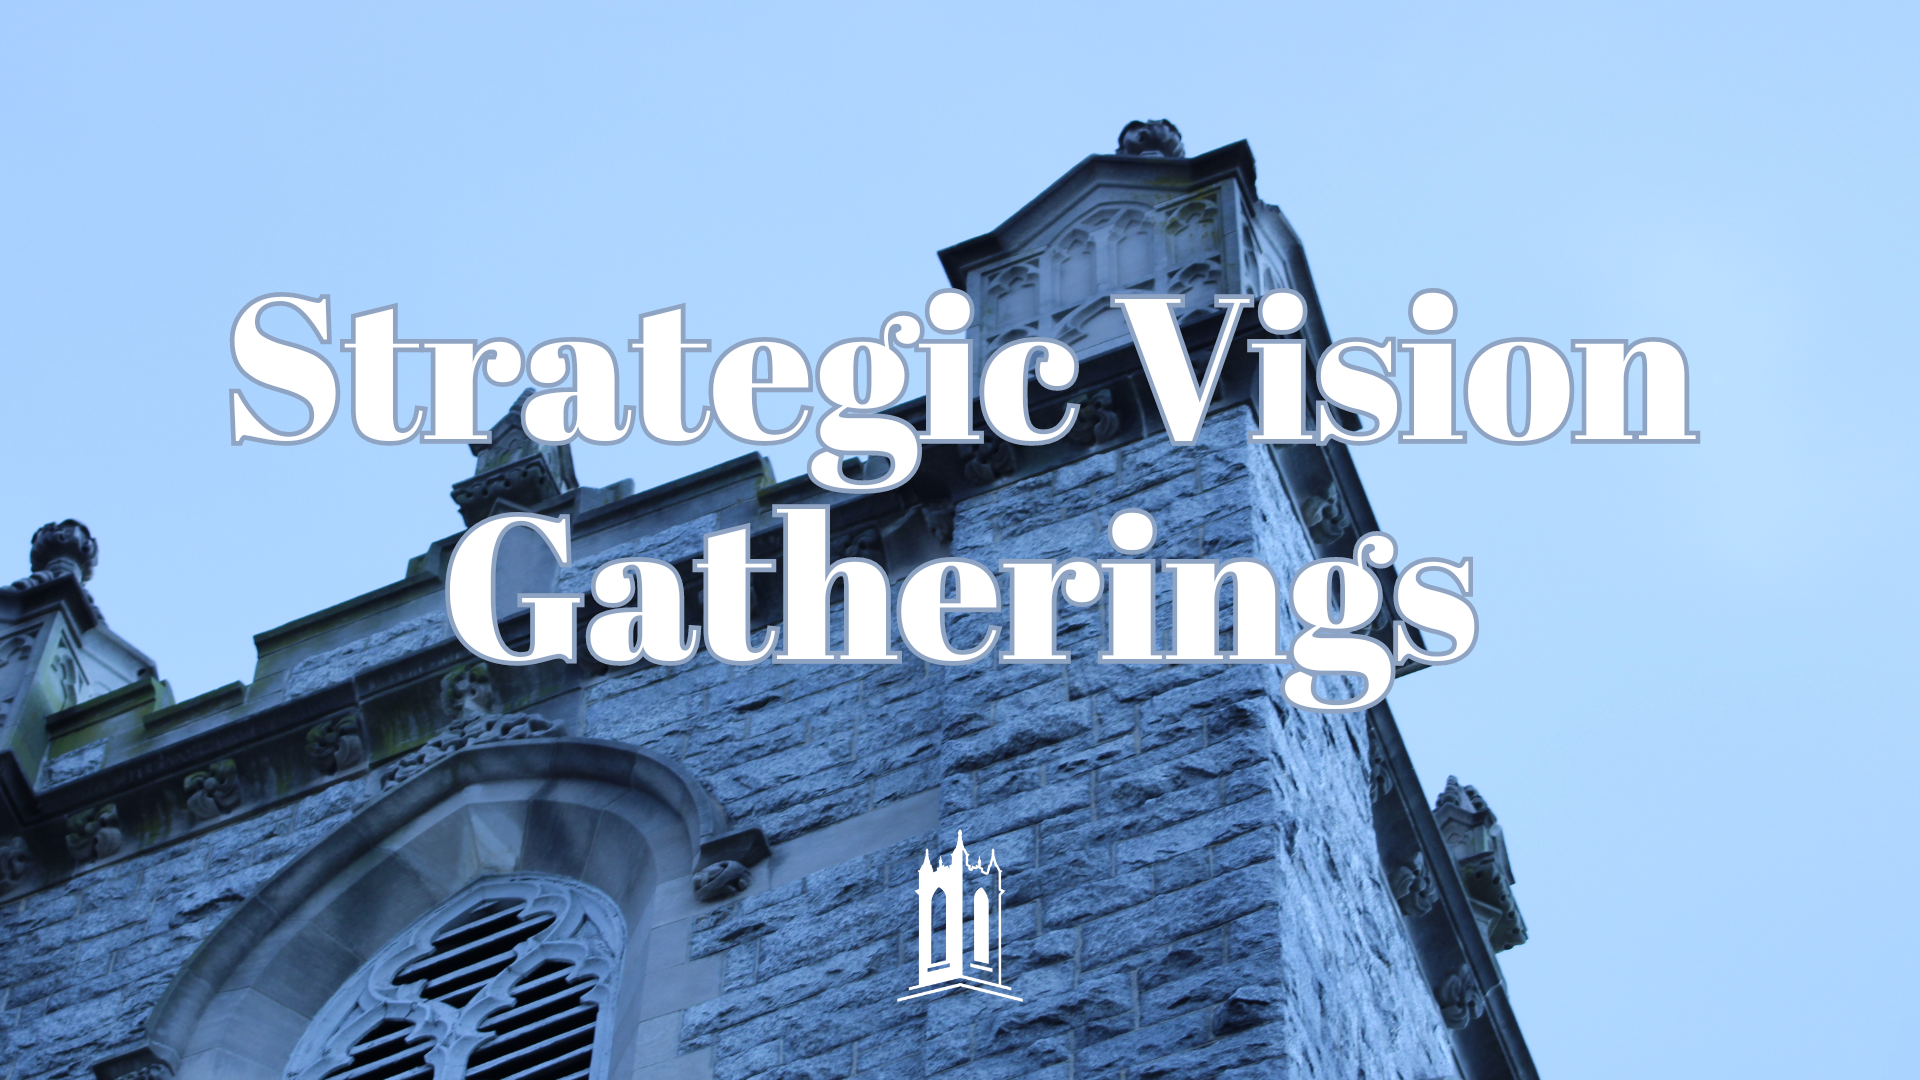 Strategic Vision Gathering: Online, facilitated by Pastor Ginger and Cara Crumpler